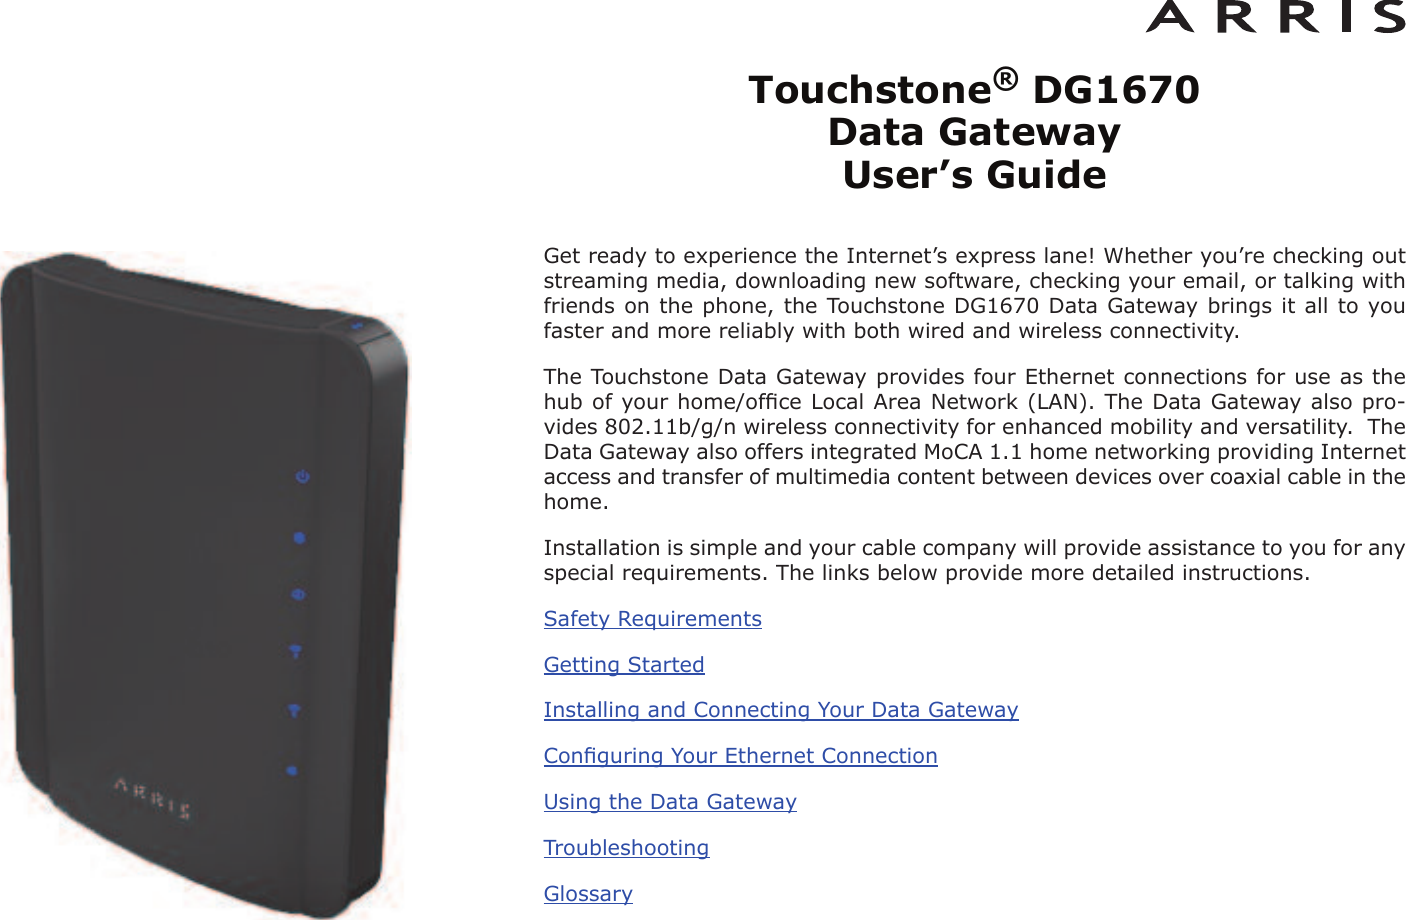 Touchstone®DG1670 Data Gateway User’s GuideGet ready to experience the Internet’s express lane! Whether you’re checking outstreaming media, downloading new software, checking your email, or talking withfriends on the phone, the Touchstone DG1670 Data Gateway brings it all to youfaster and more reliably with both wired and wireless connectivity.The Touchstone Data Gateway provides four Ethernet connections for use as thehub of your home/ofﬁce Local Area Network (LAN). The Data Gateway also pro-vides 802.11b/g/n wireless connectivity for enhanced mobility and versatility.  TheData Gateway also offers integrated MoCA 1.1 home networking providing Internetaccess and transfer of multimedia content between devices over coaxial cable in thehome.Installation is simple and your cable company will provide assistance to you for anyspecial requirements. The links below provide more detailed instructions.Safety RequirementsGetting StartedInstalling and Connecting Your Data GatewayConﬁguring Your Ethernet ConnectionUsing the Data GatewayTroubleshootingGlossary